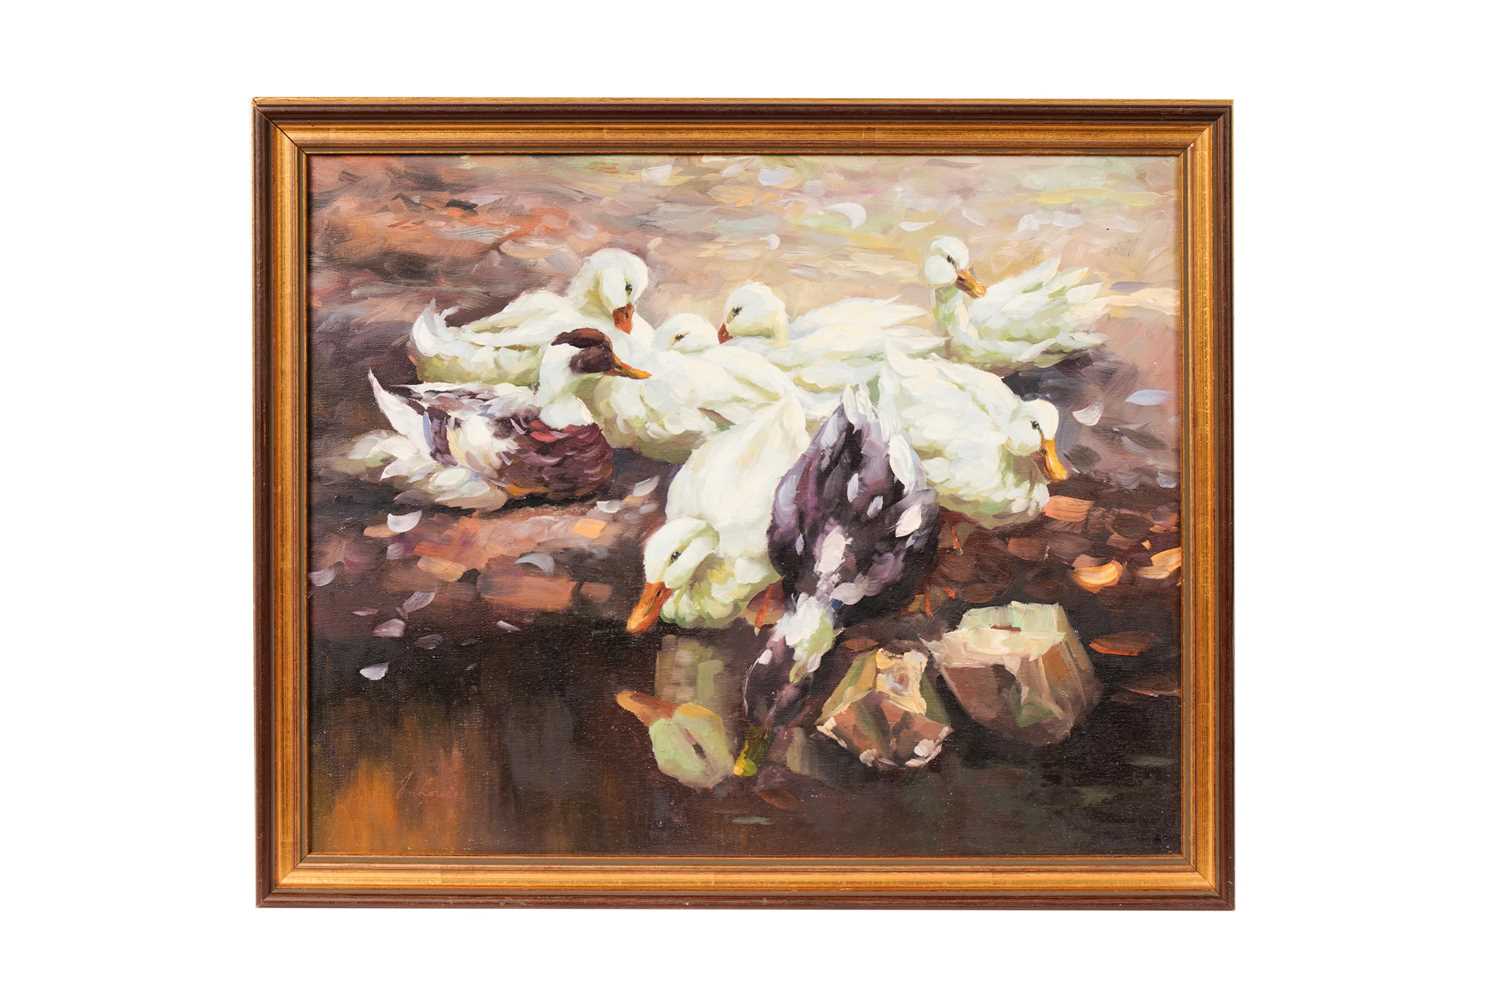 J. Lewis - Ducks and Feathers | oil